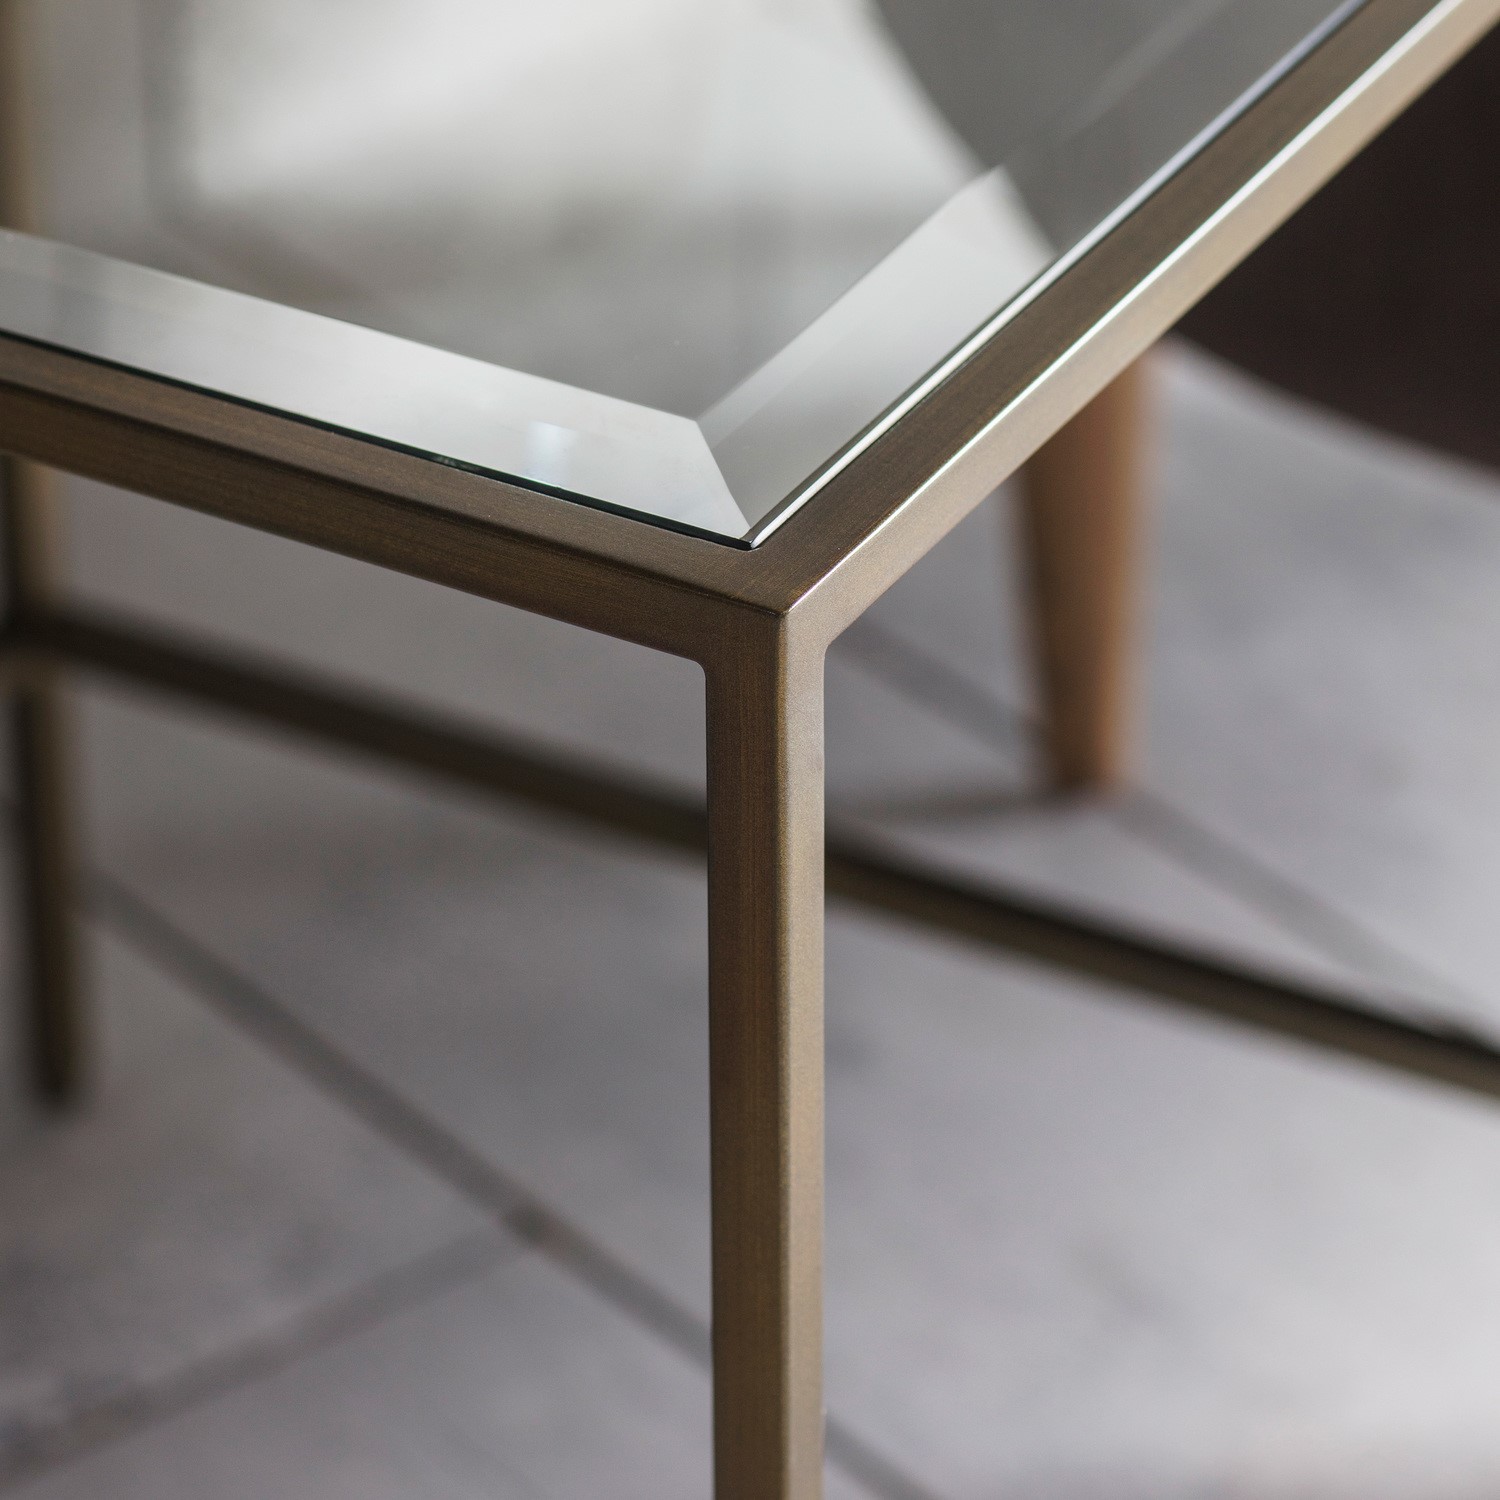 Read more about Raya bronze side table caspian house